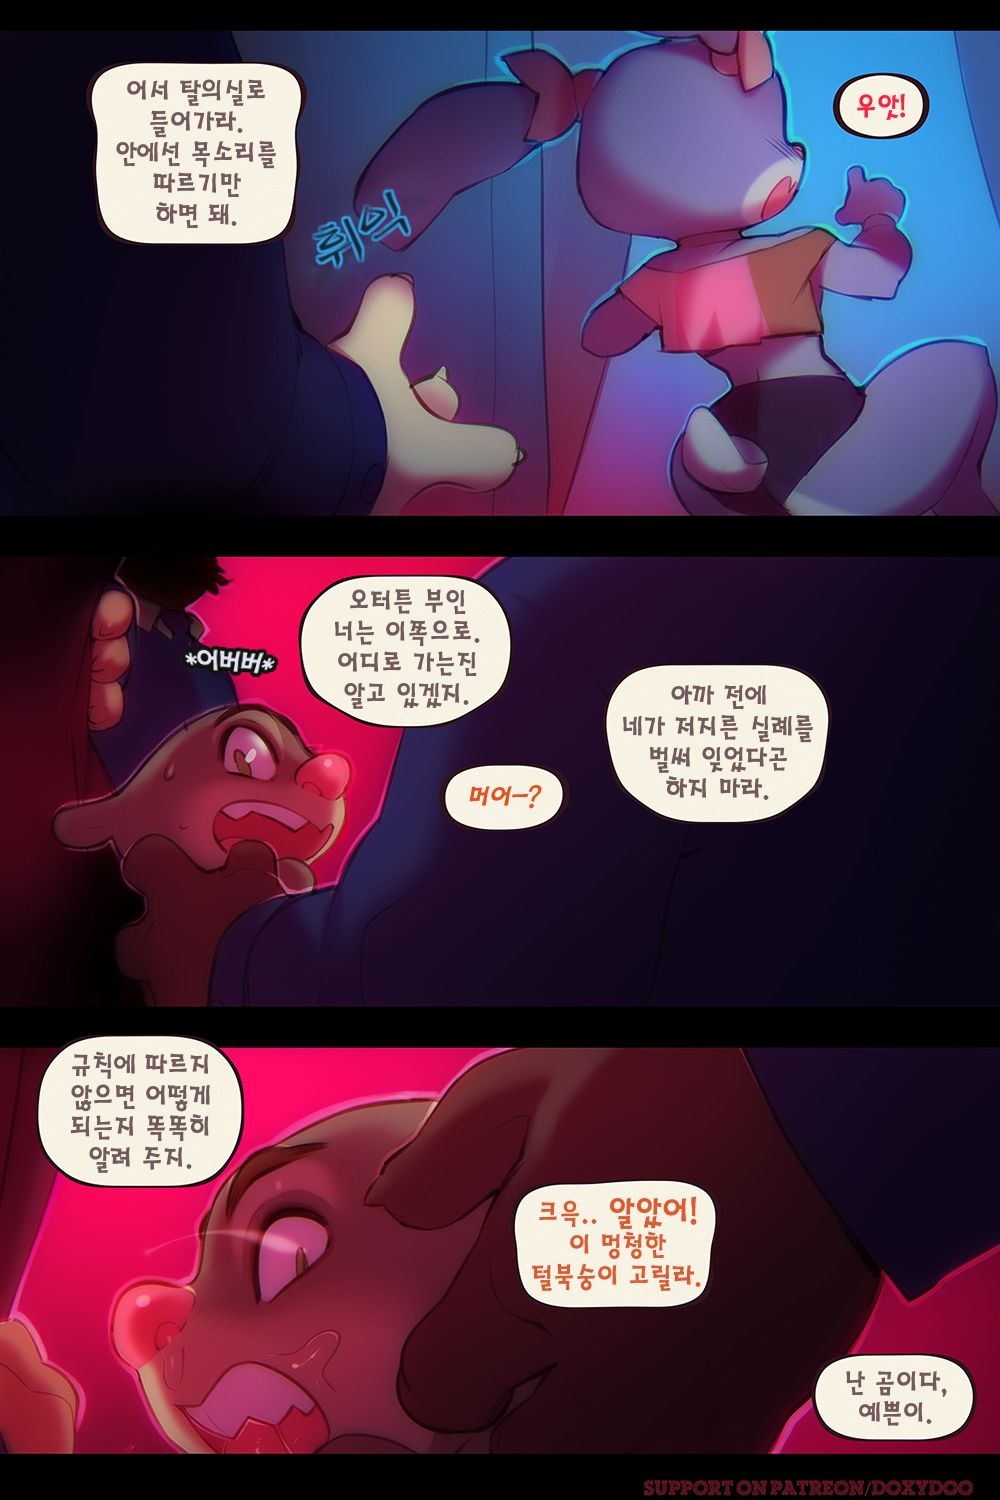 [Doxy] Sweet Sting Part 2: Down The Rabbit Hole | 달콤한 함정수사 2부: 토끼 굴속으로 (Zootopia) [Korean] [Ongoing] 19